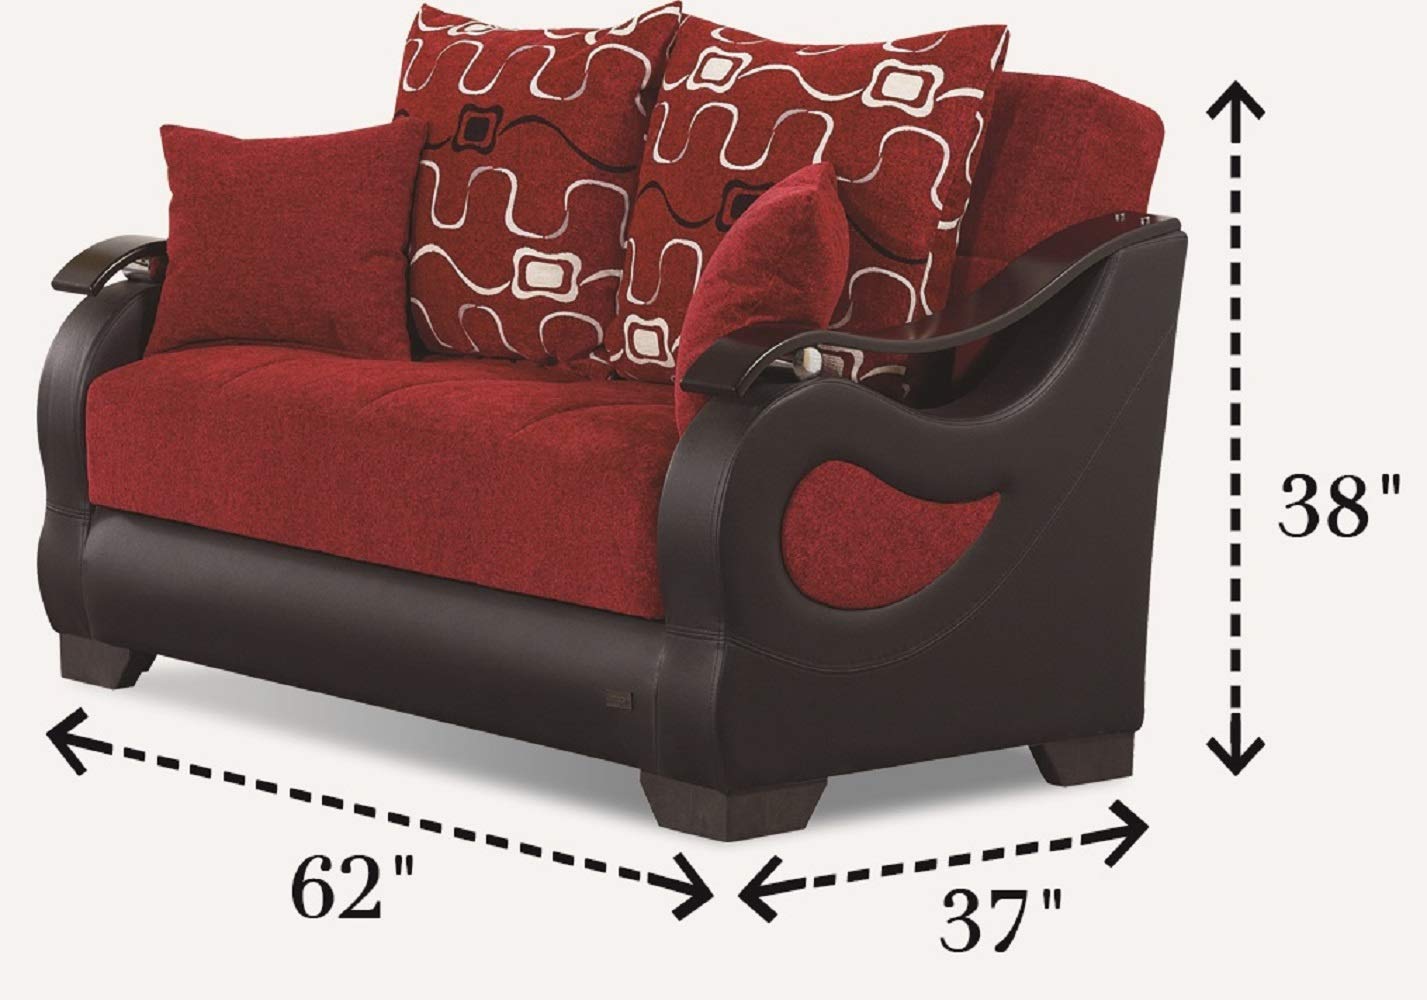 BEYAN Pittsburgh Collection Modern Convertible Storage Loveseat with Ample Storage Space, Includes 2 Pillows, Red/Black